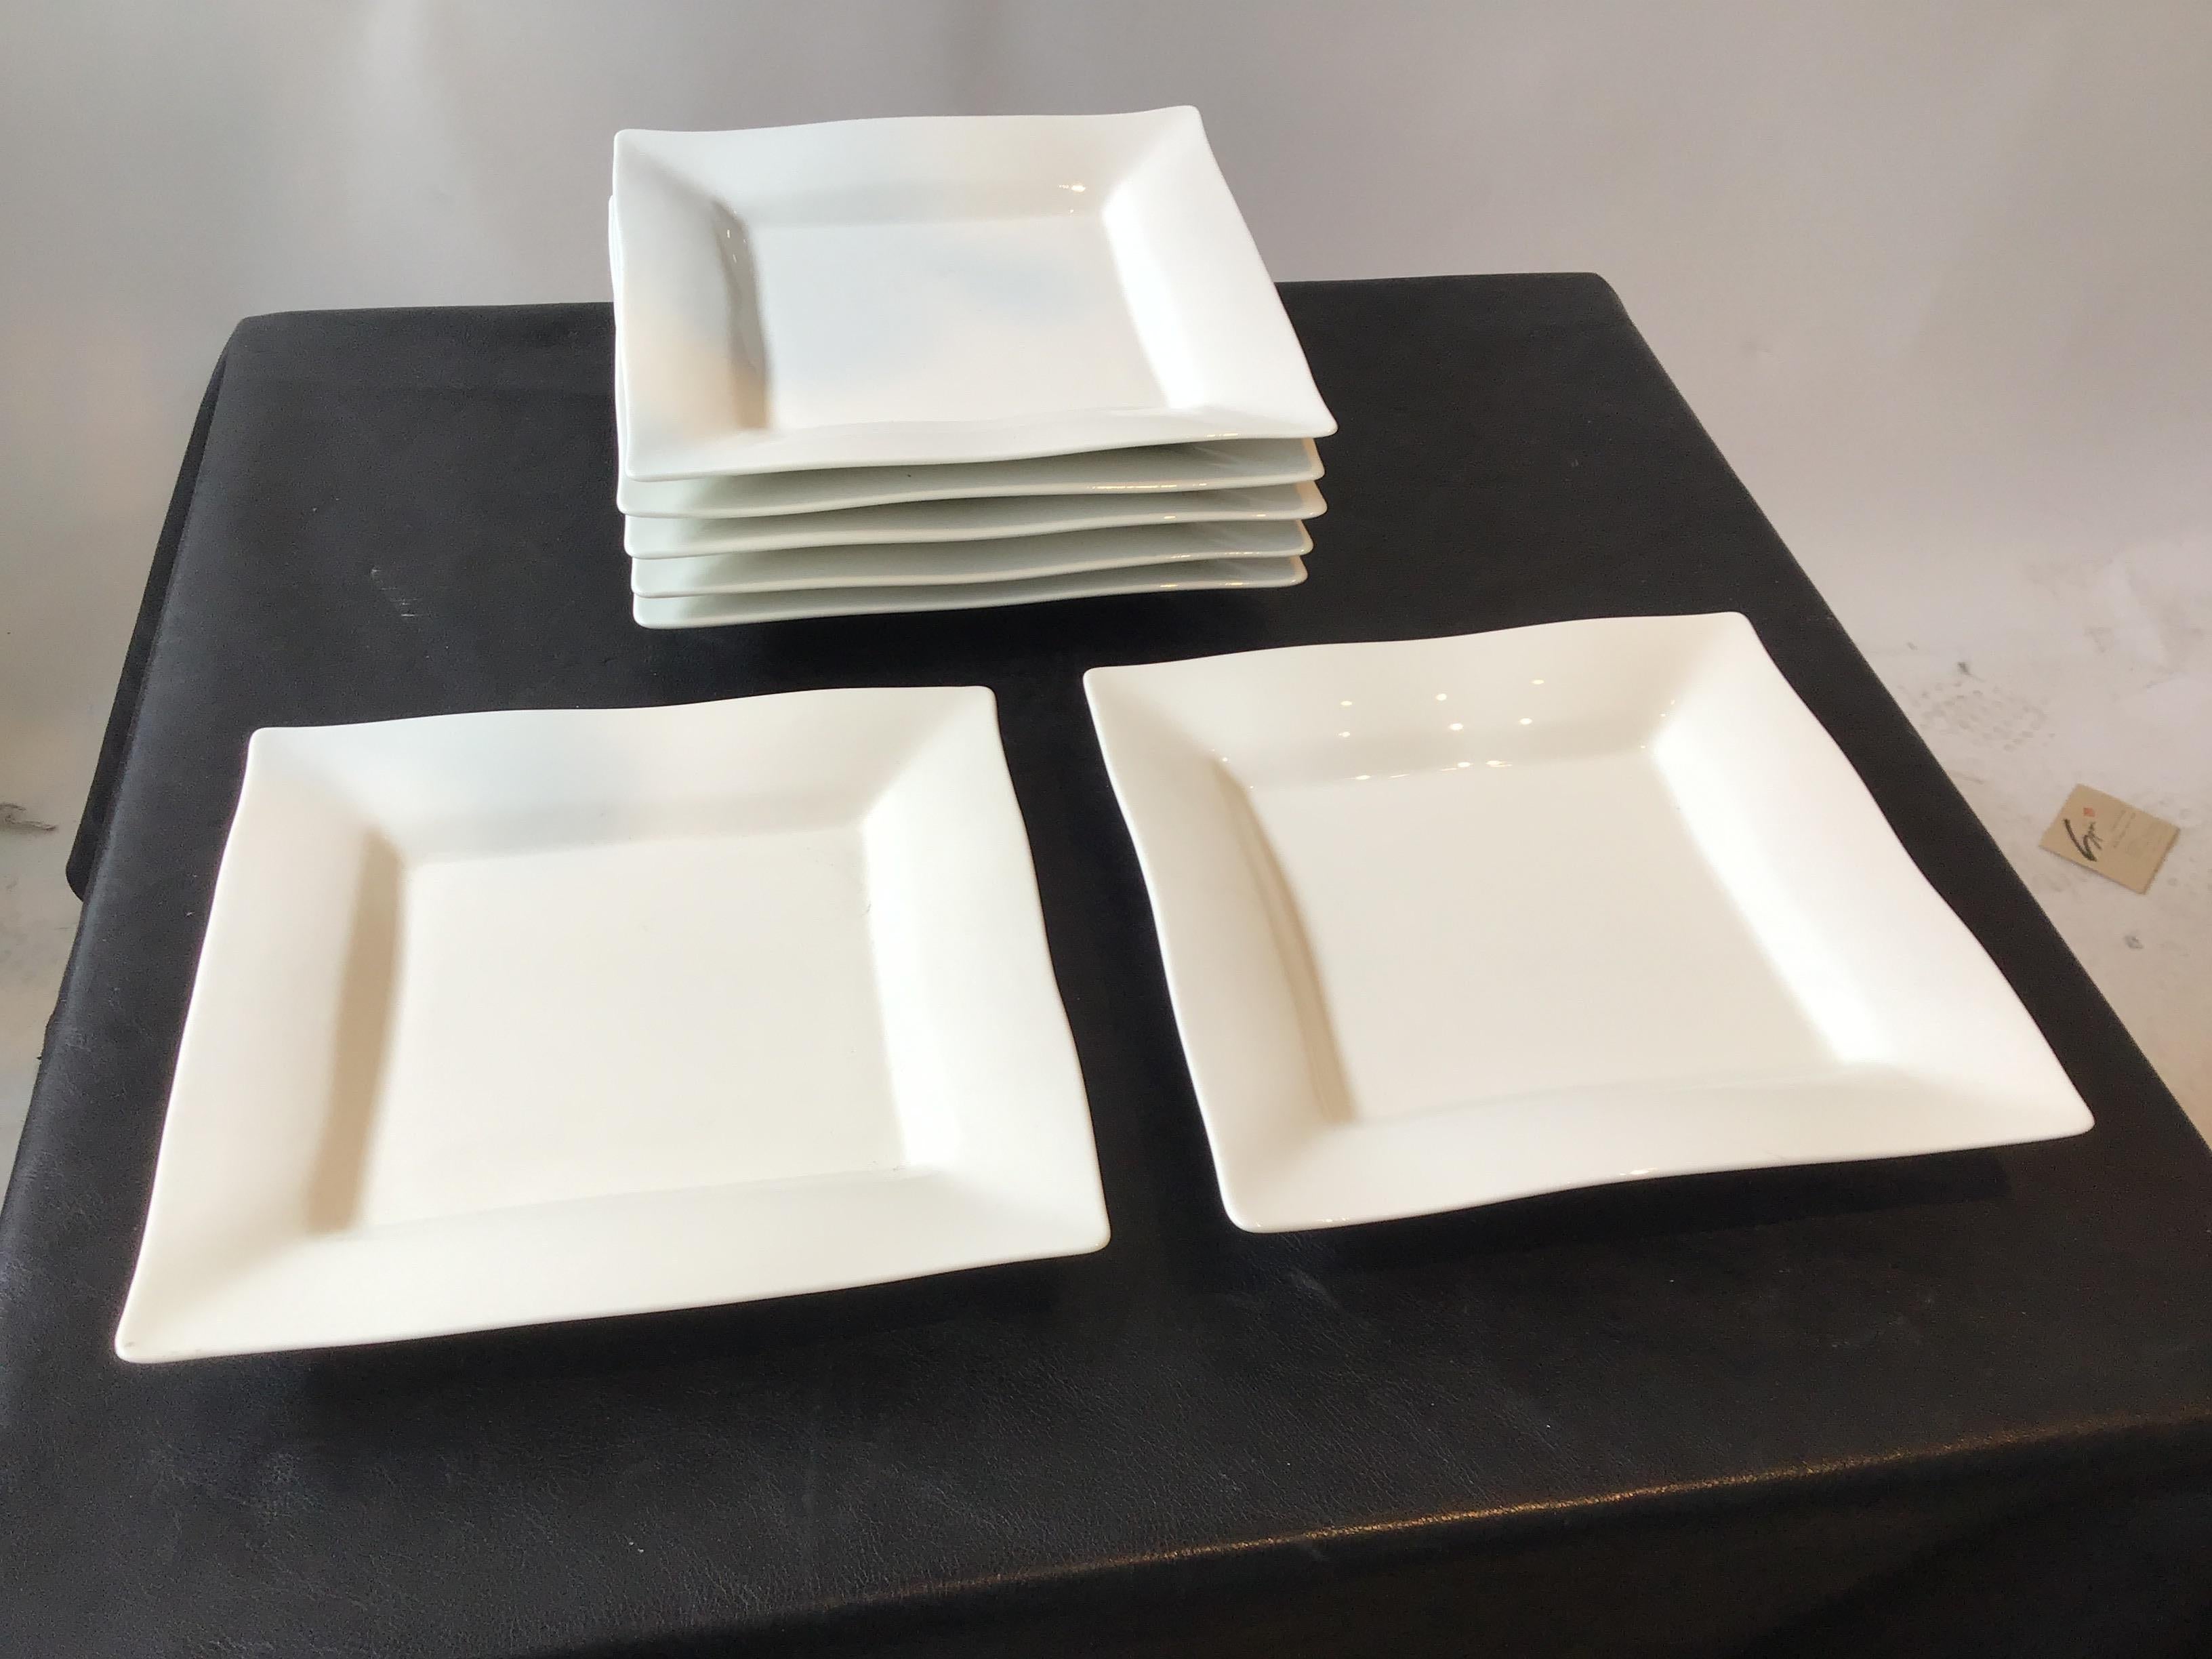 6 Spin Ceramics lunch plates. New.